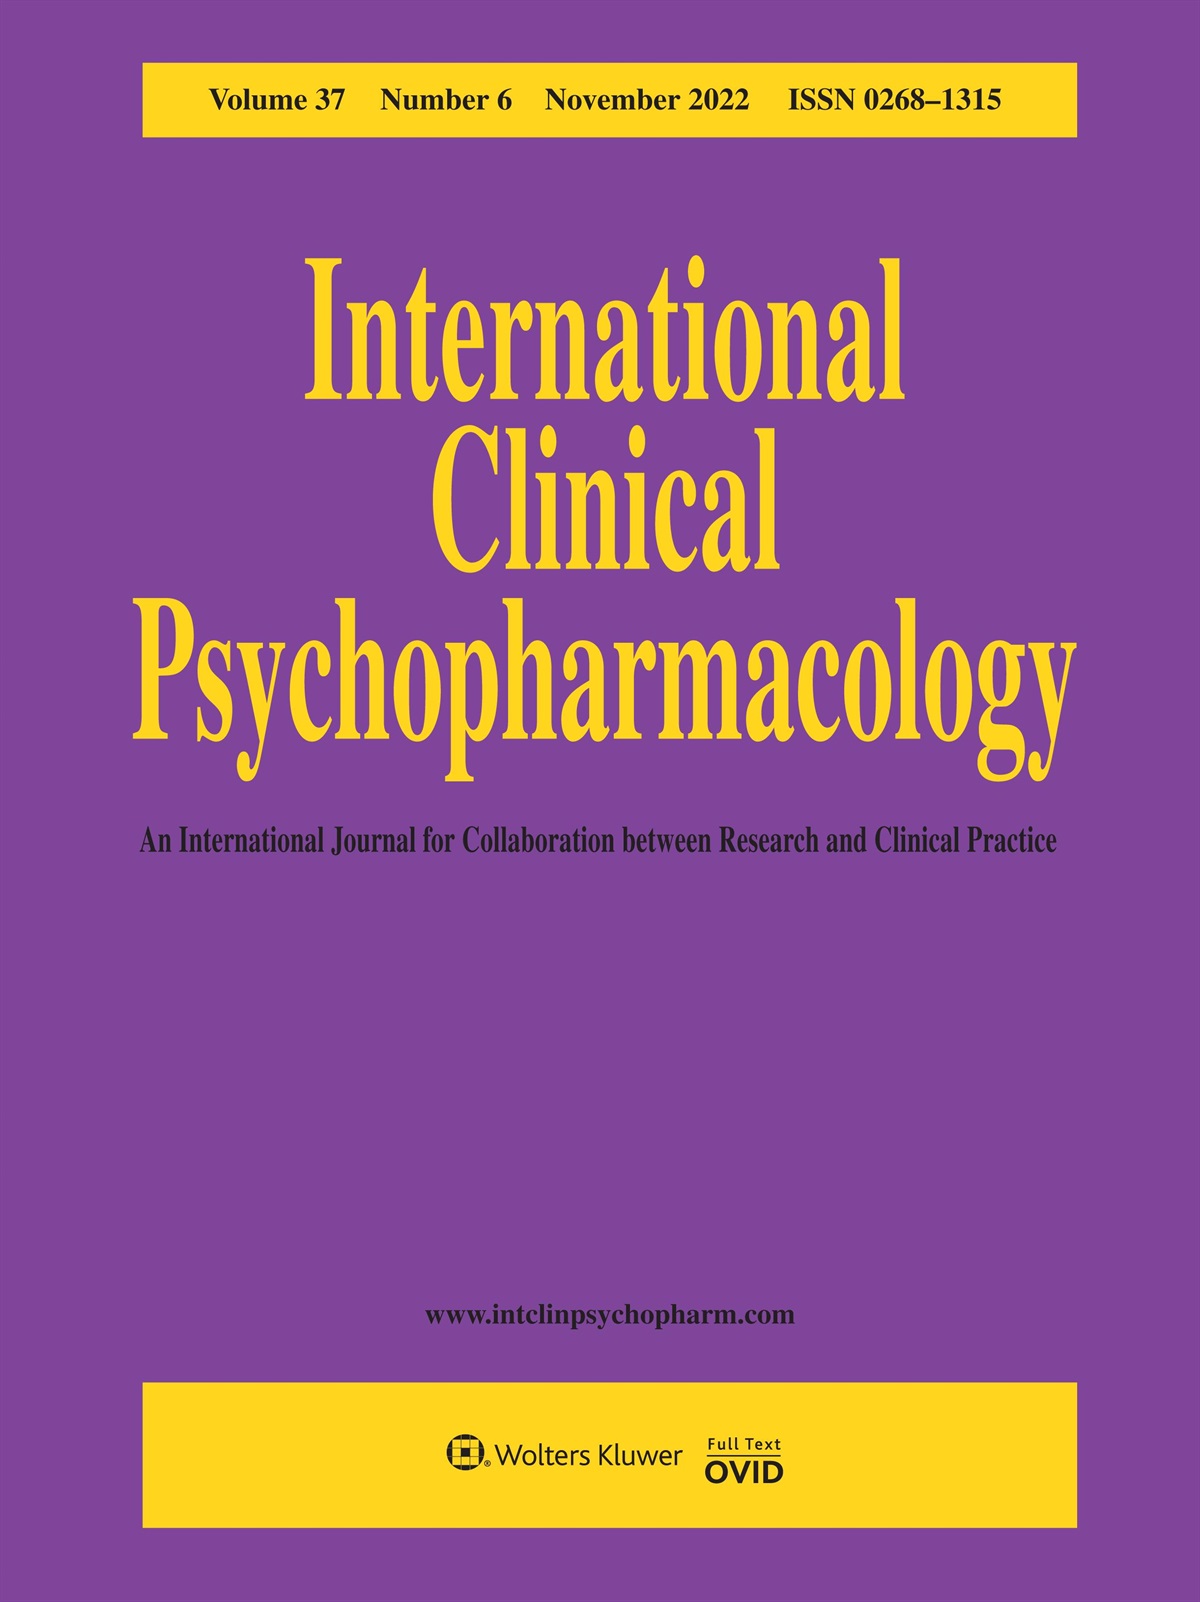 Open issues in bipolar and antipsychotic treatments